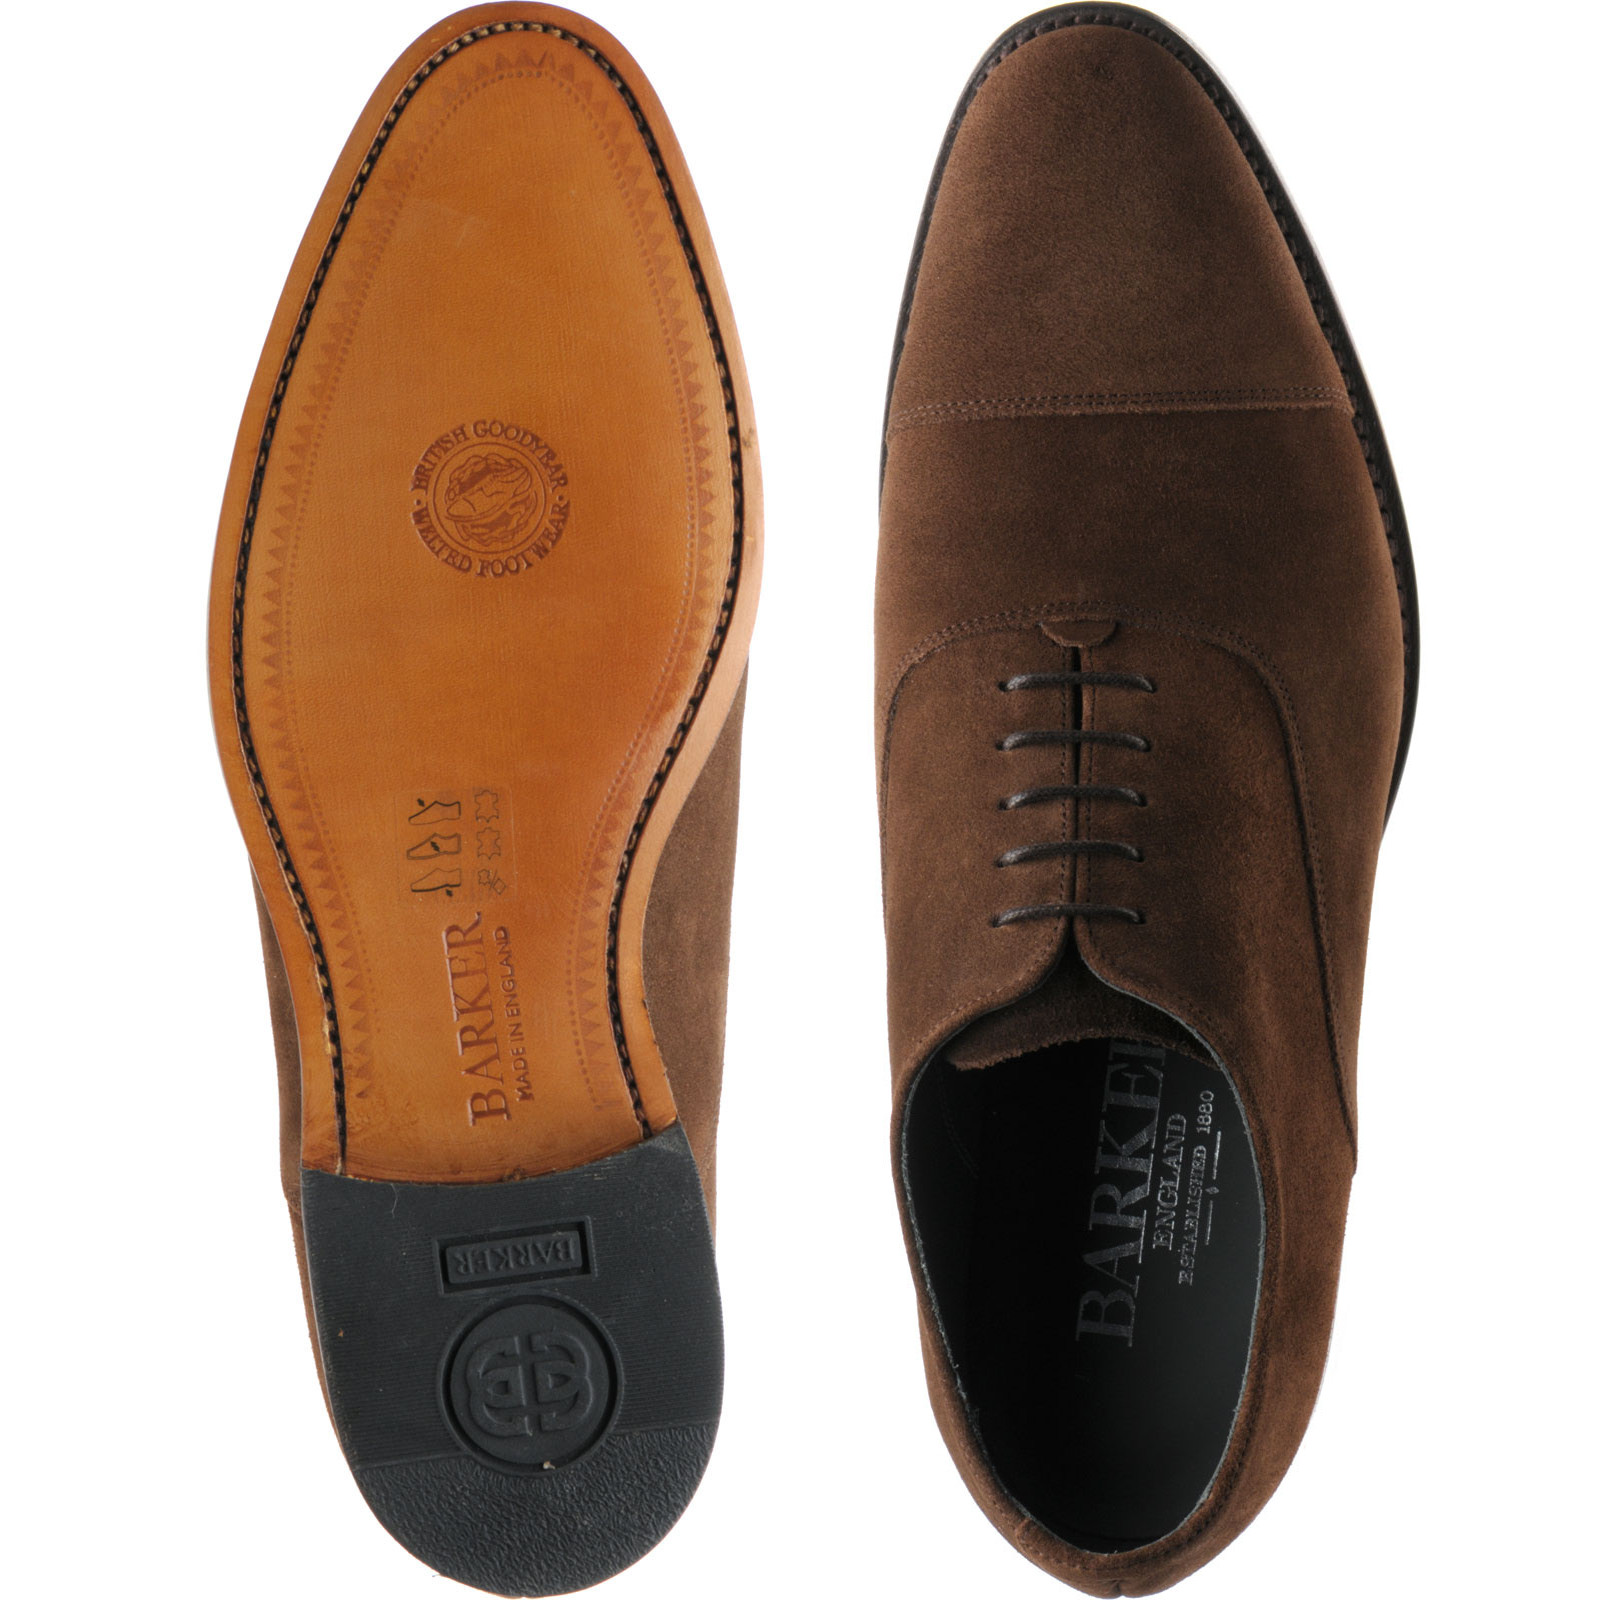 Barker shoes | Barker Professional | Winsford in Castagnia Suede at ...